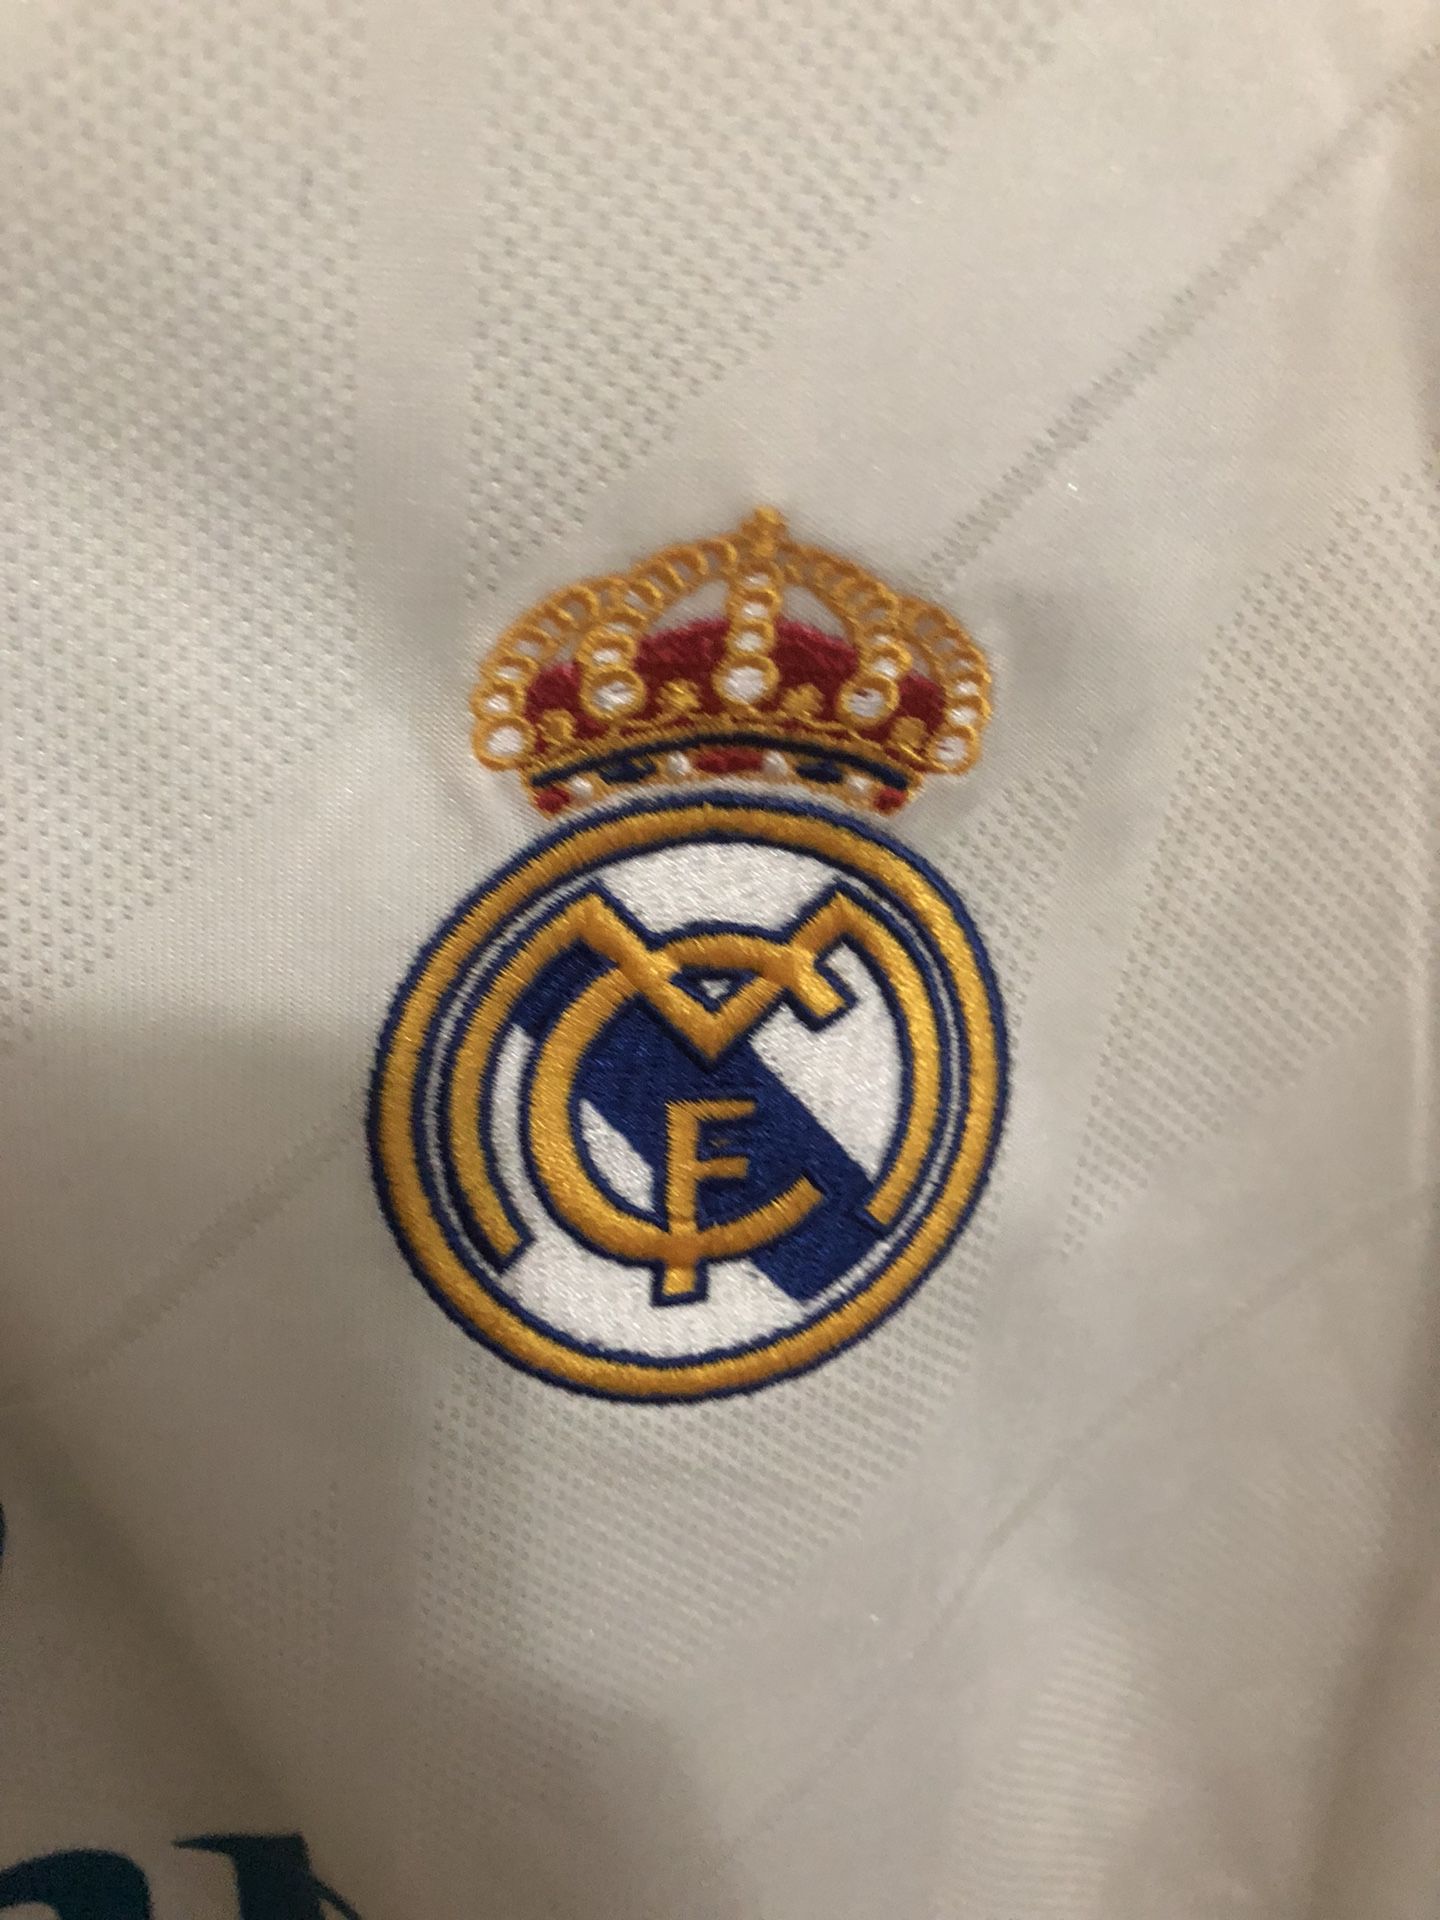 Real Madrid Cristiano Ronaldo long sleeve jersey for Sale in Rockville, MD  - OfferUp